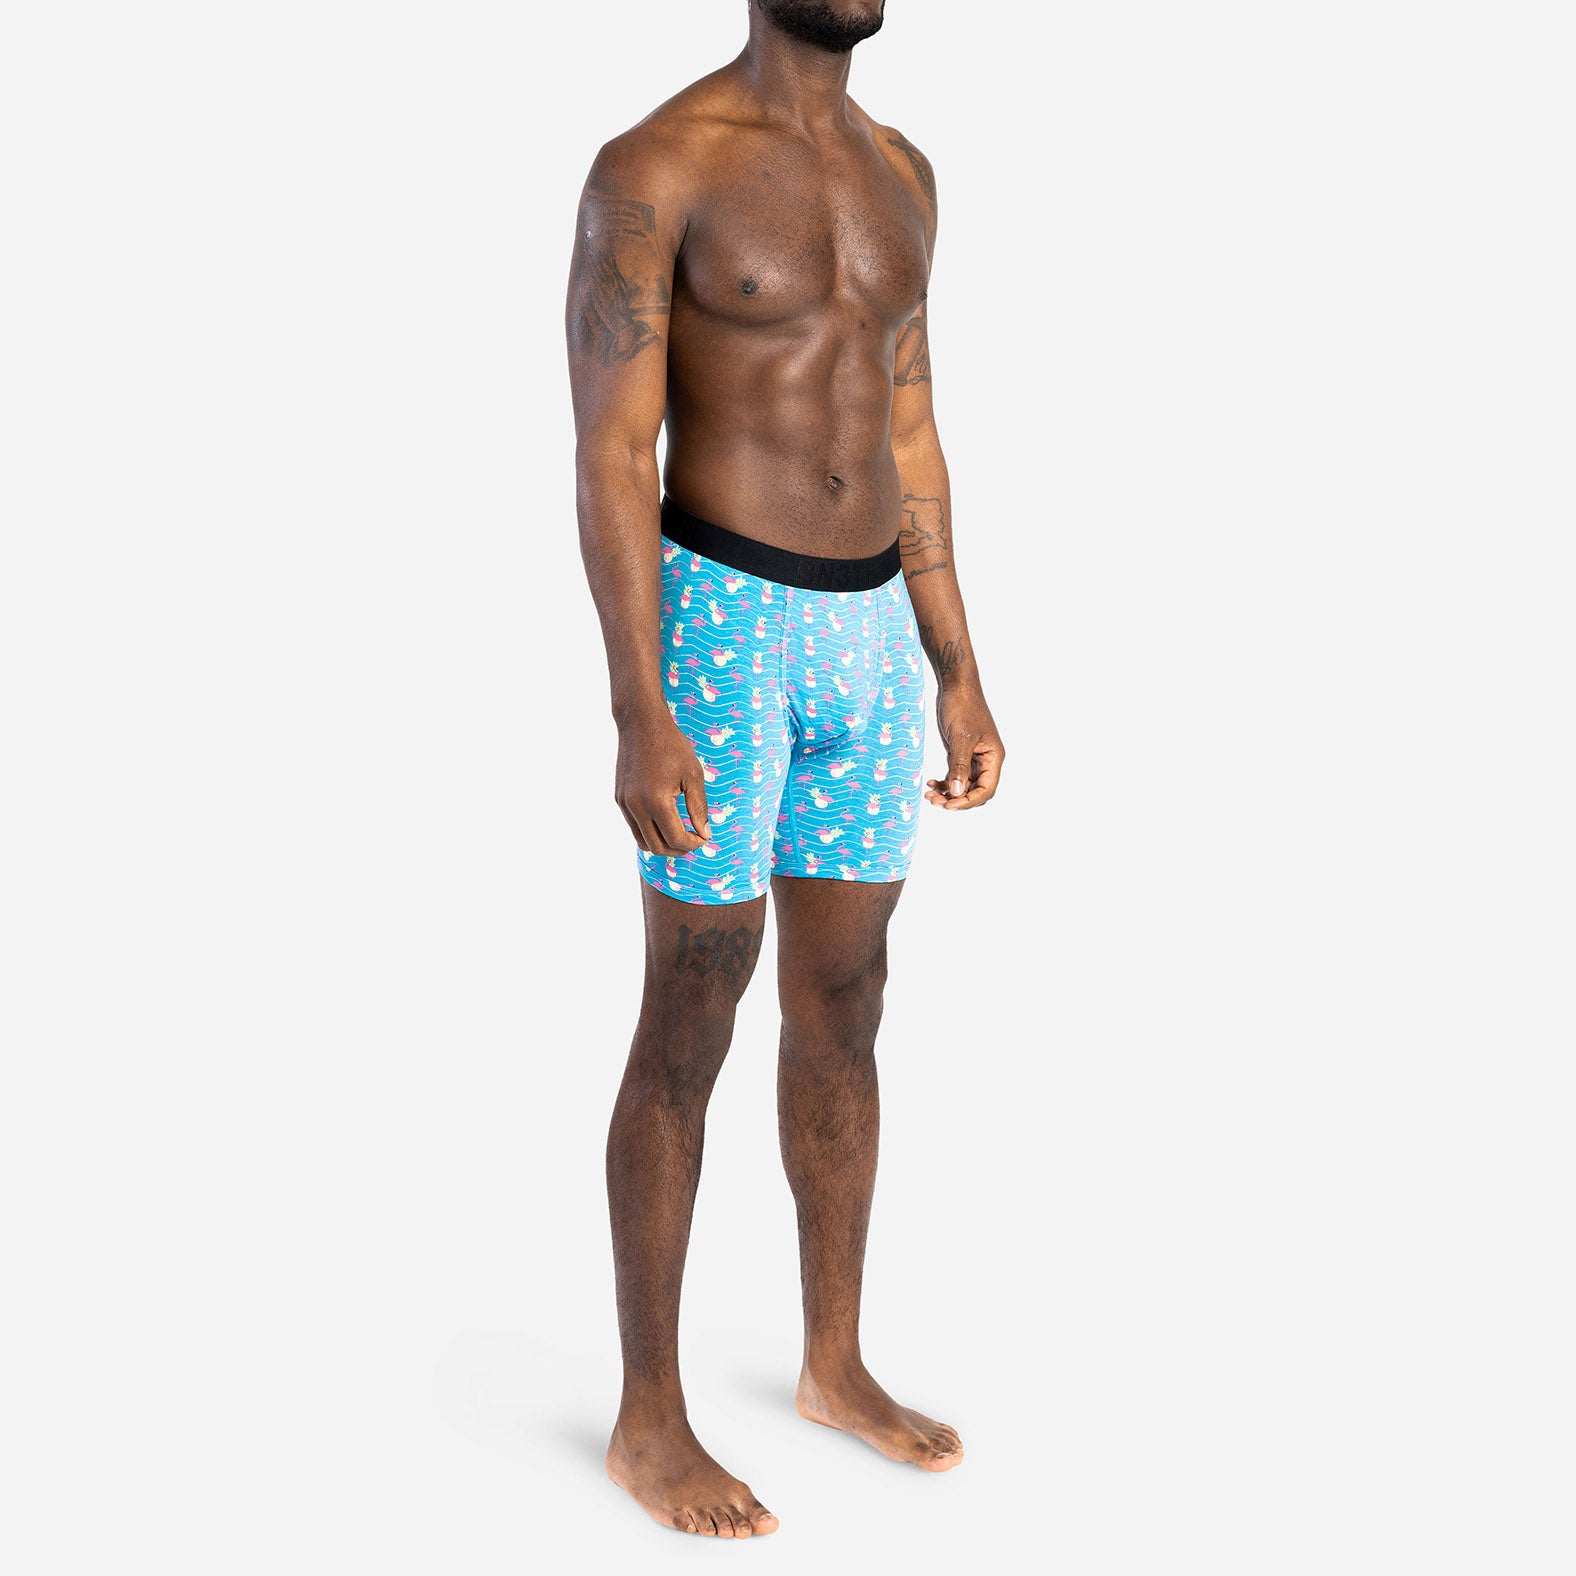 Boxers or briefs? Men who wear boxers have better swimmers